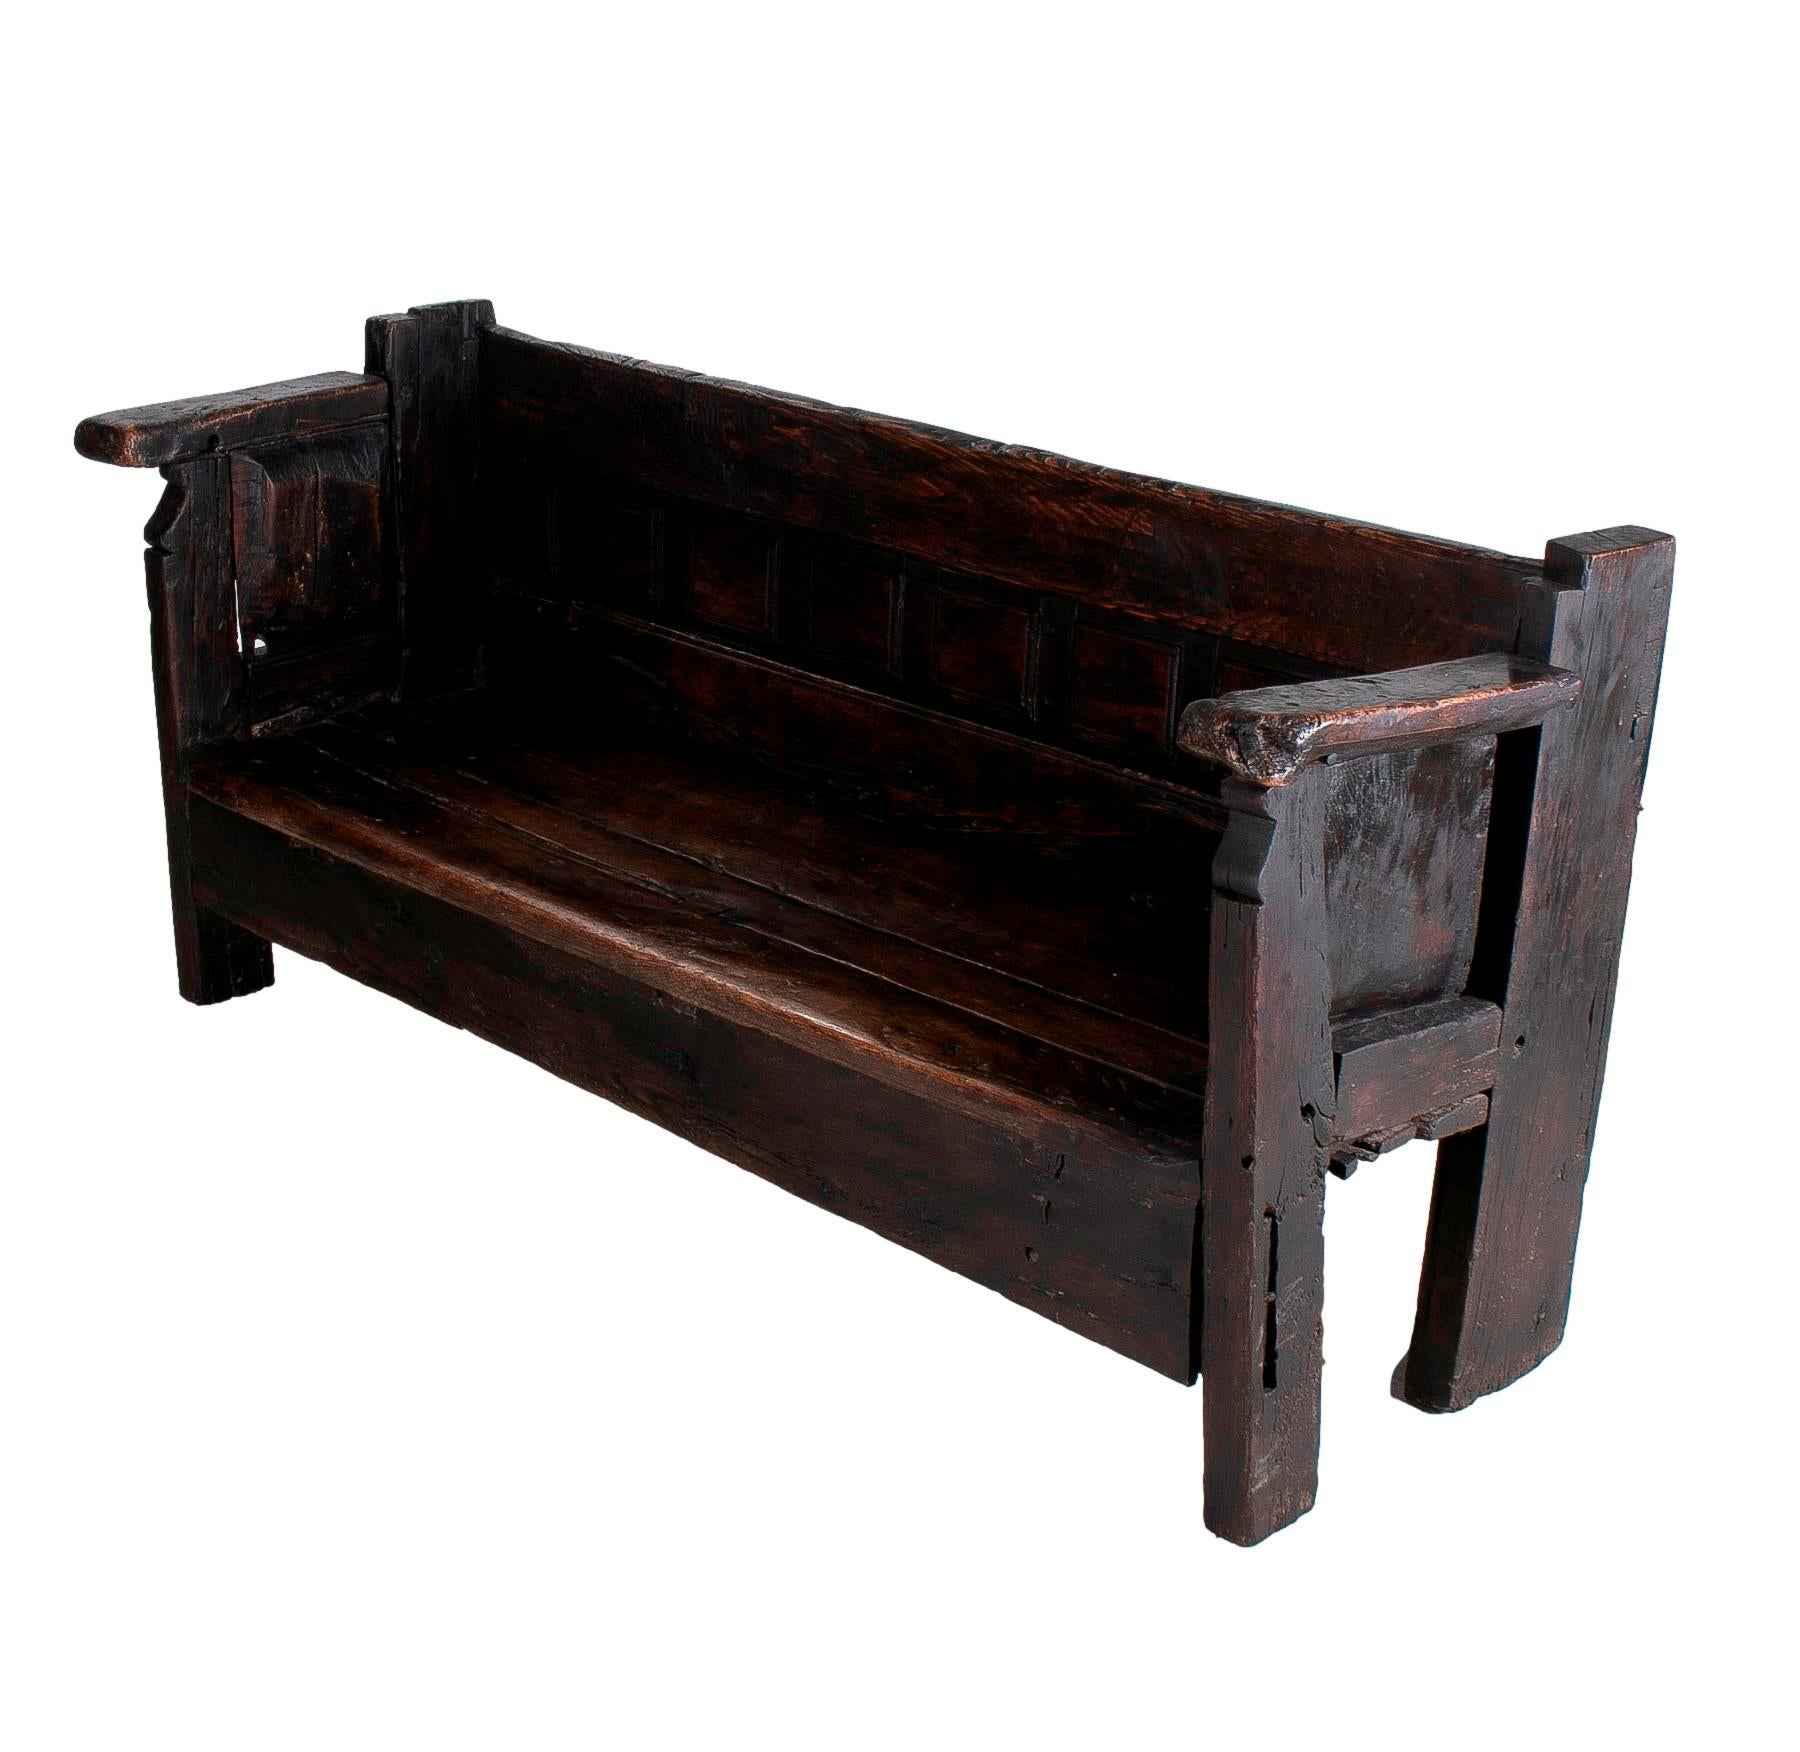 handmade wooden benches